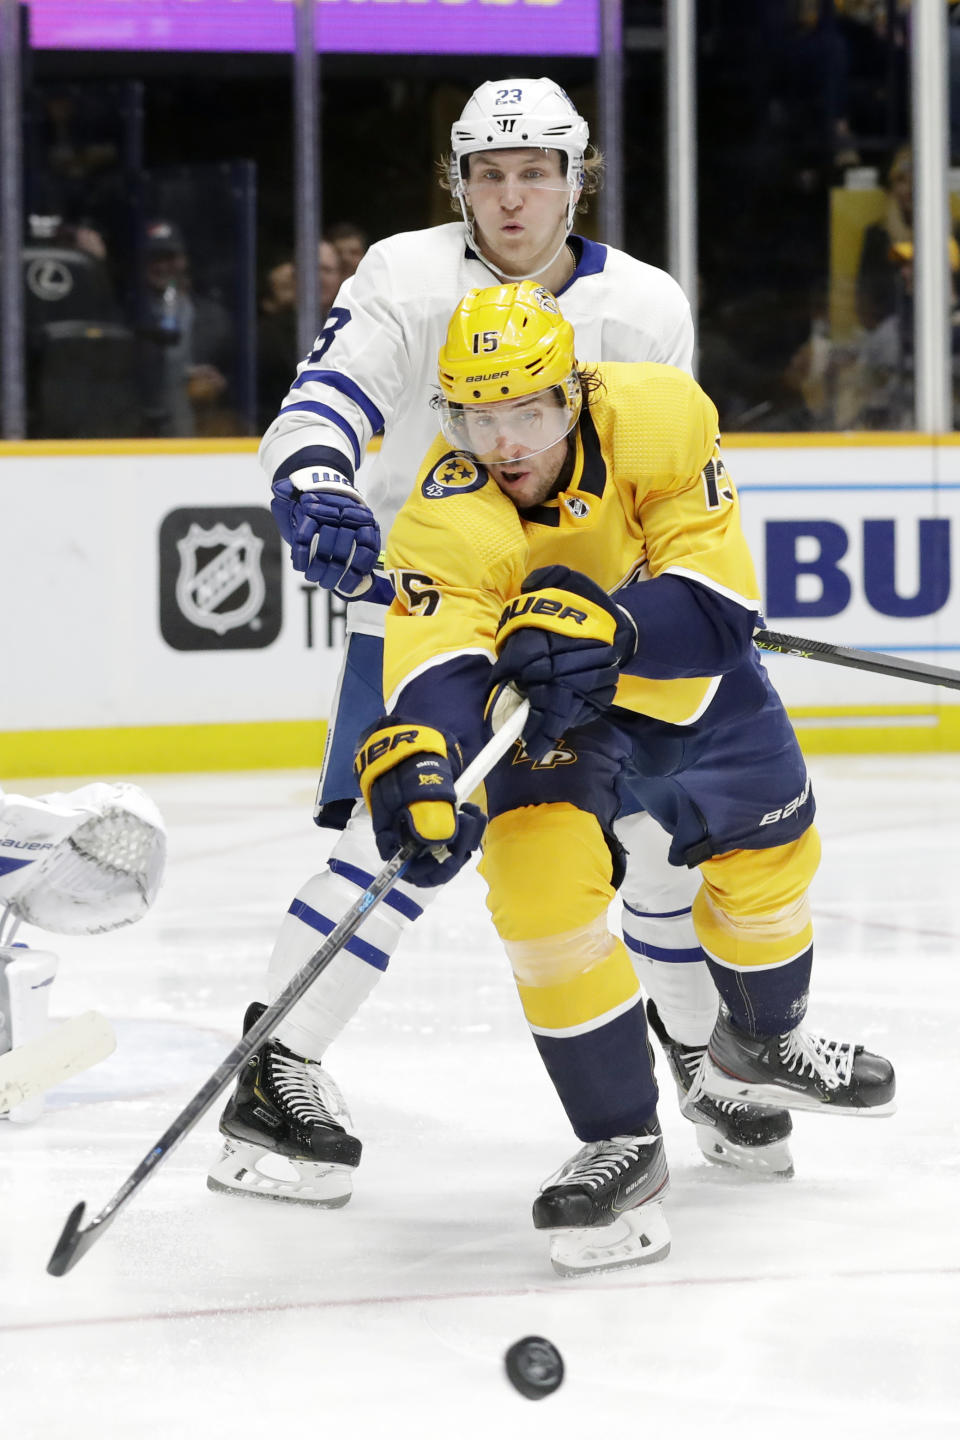 Nashville Predators right wing Craig Smith (15) reaches for the puck in front of Toronto Maple Leafs defenseman Travis Dermott (23) in the second period of an NHL hockey game Monday, Jan. 27, 2020, in Nashville, Tenn. (AP Photo/Mark Humphrey)